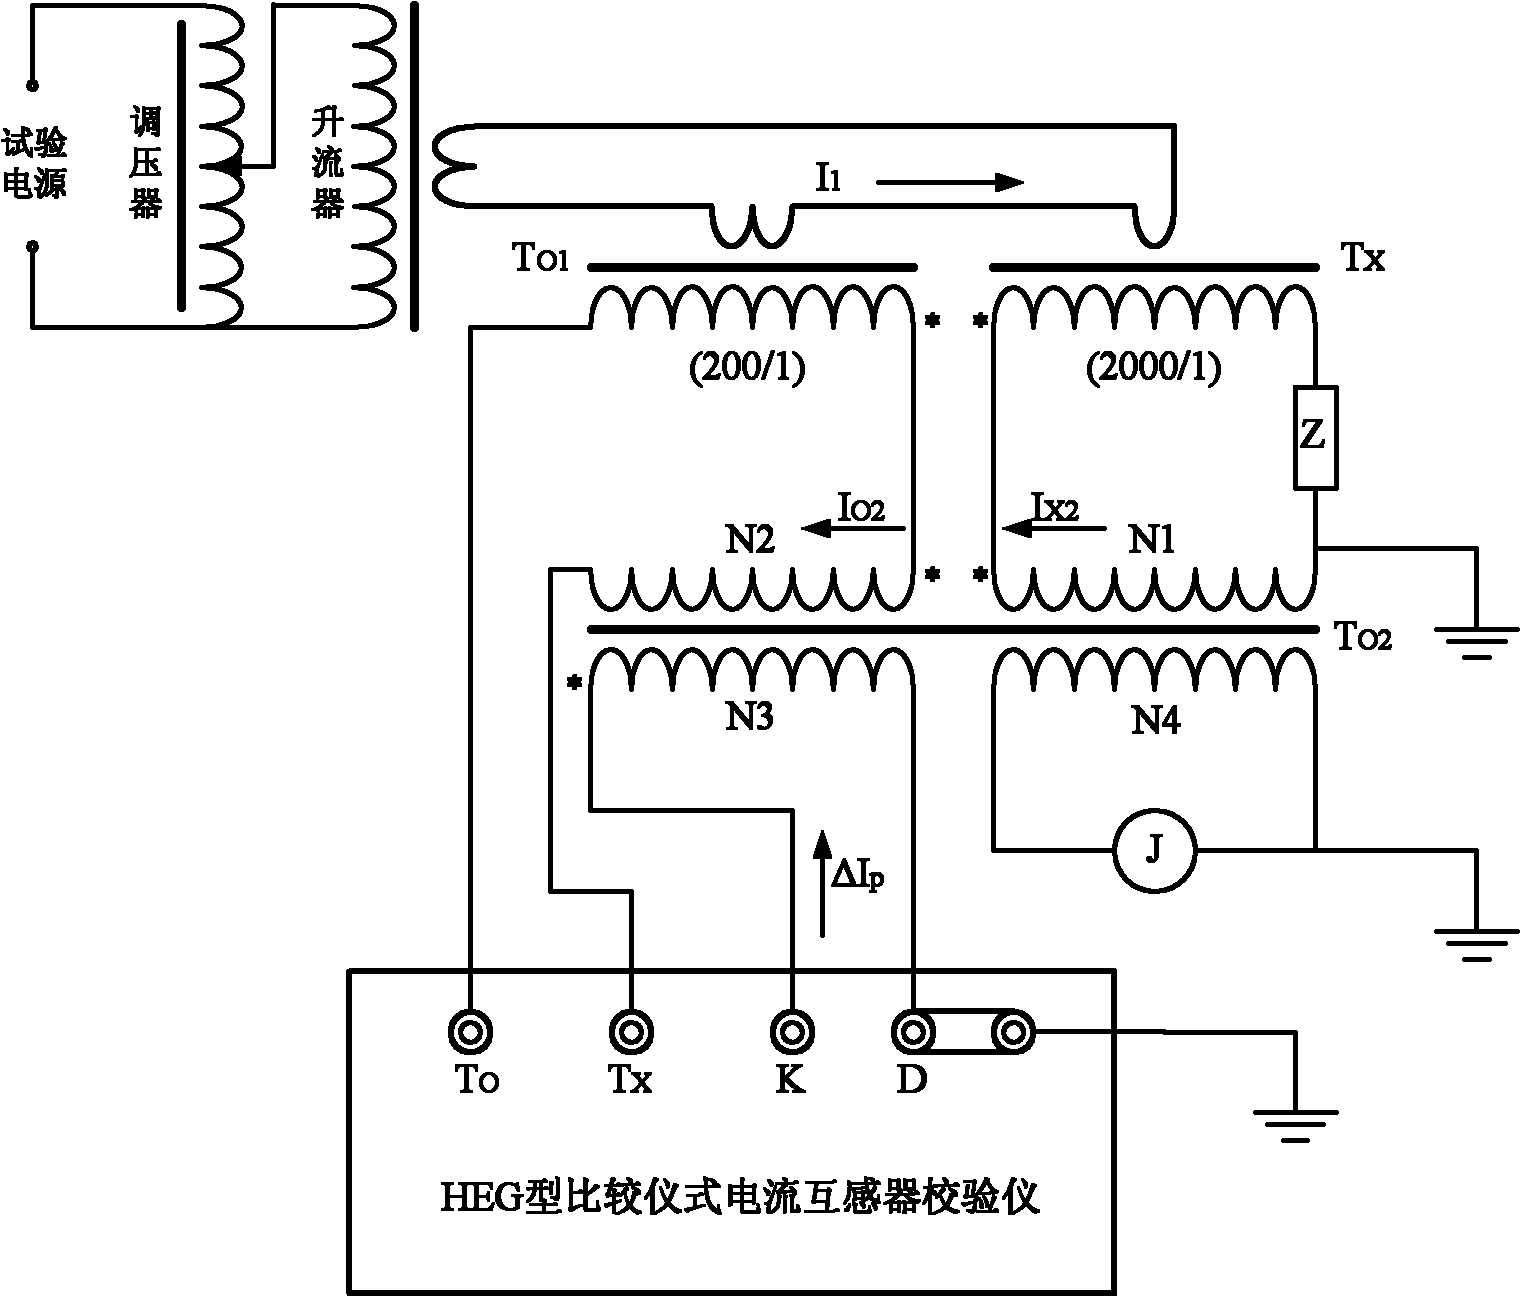 Circuit for checking on-site accuracy of current transformer under condition of underload operations